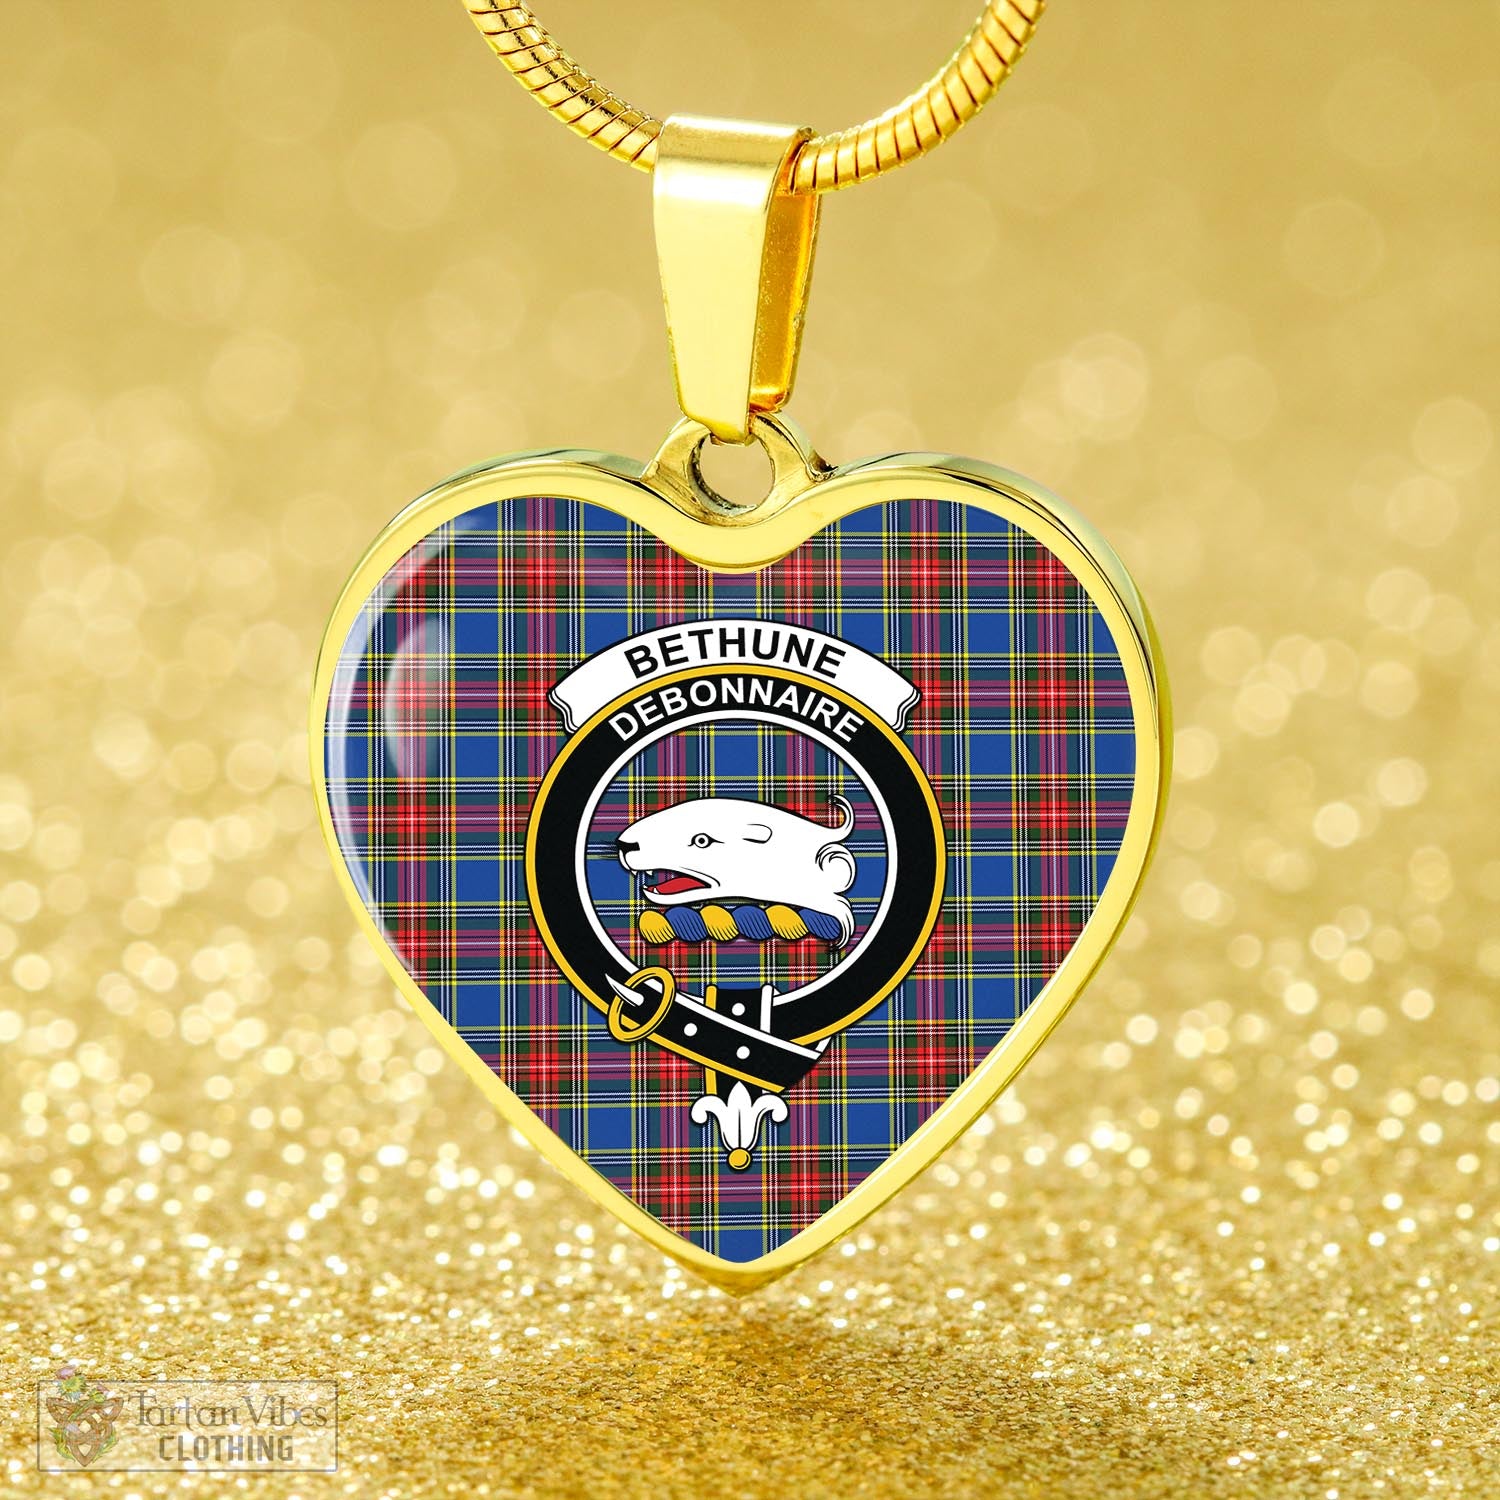 Tartan Vibes Clothing Bethune Tartan Heart Necklace with Family Crest